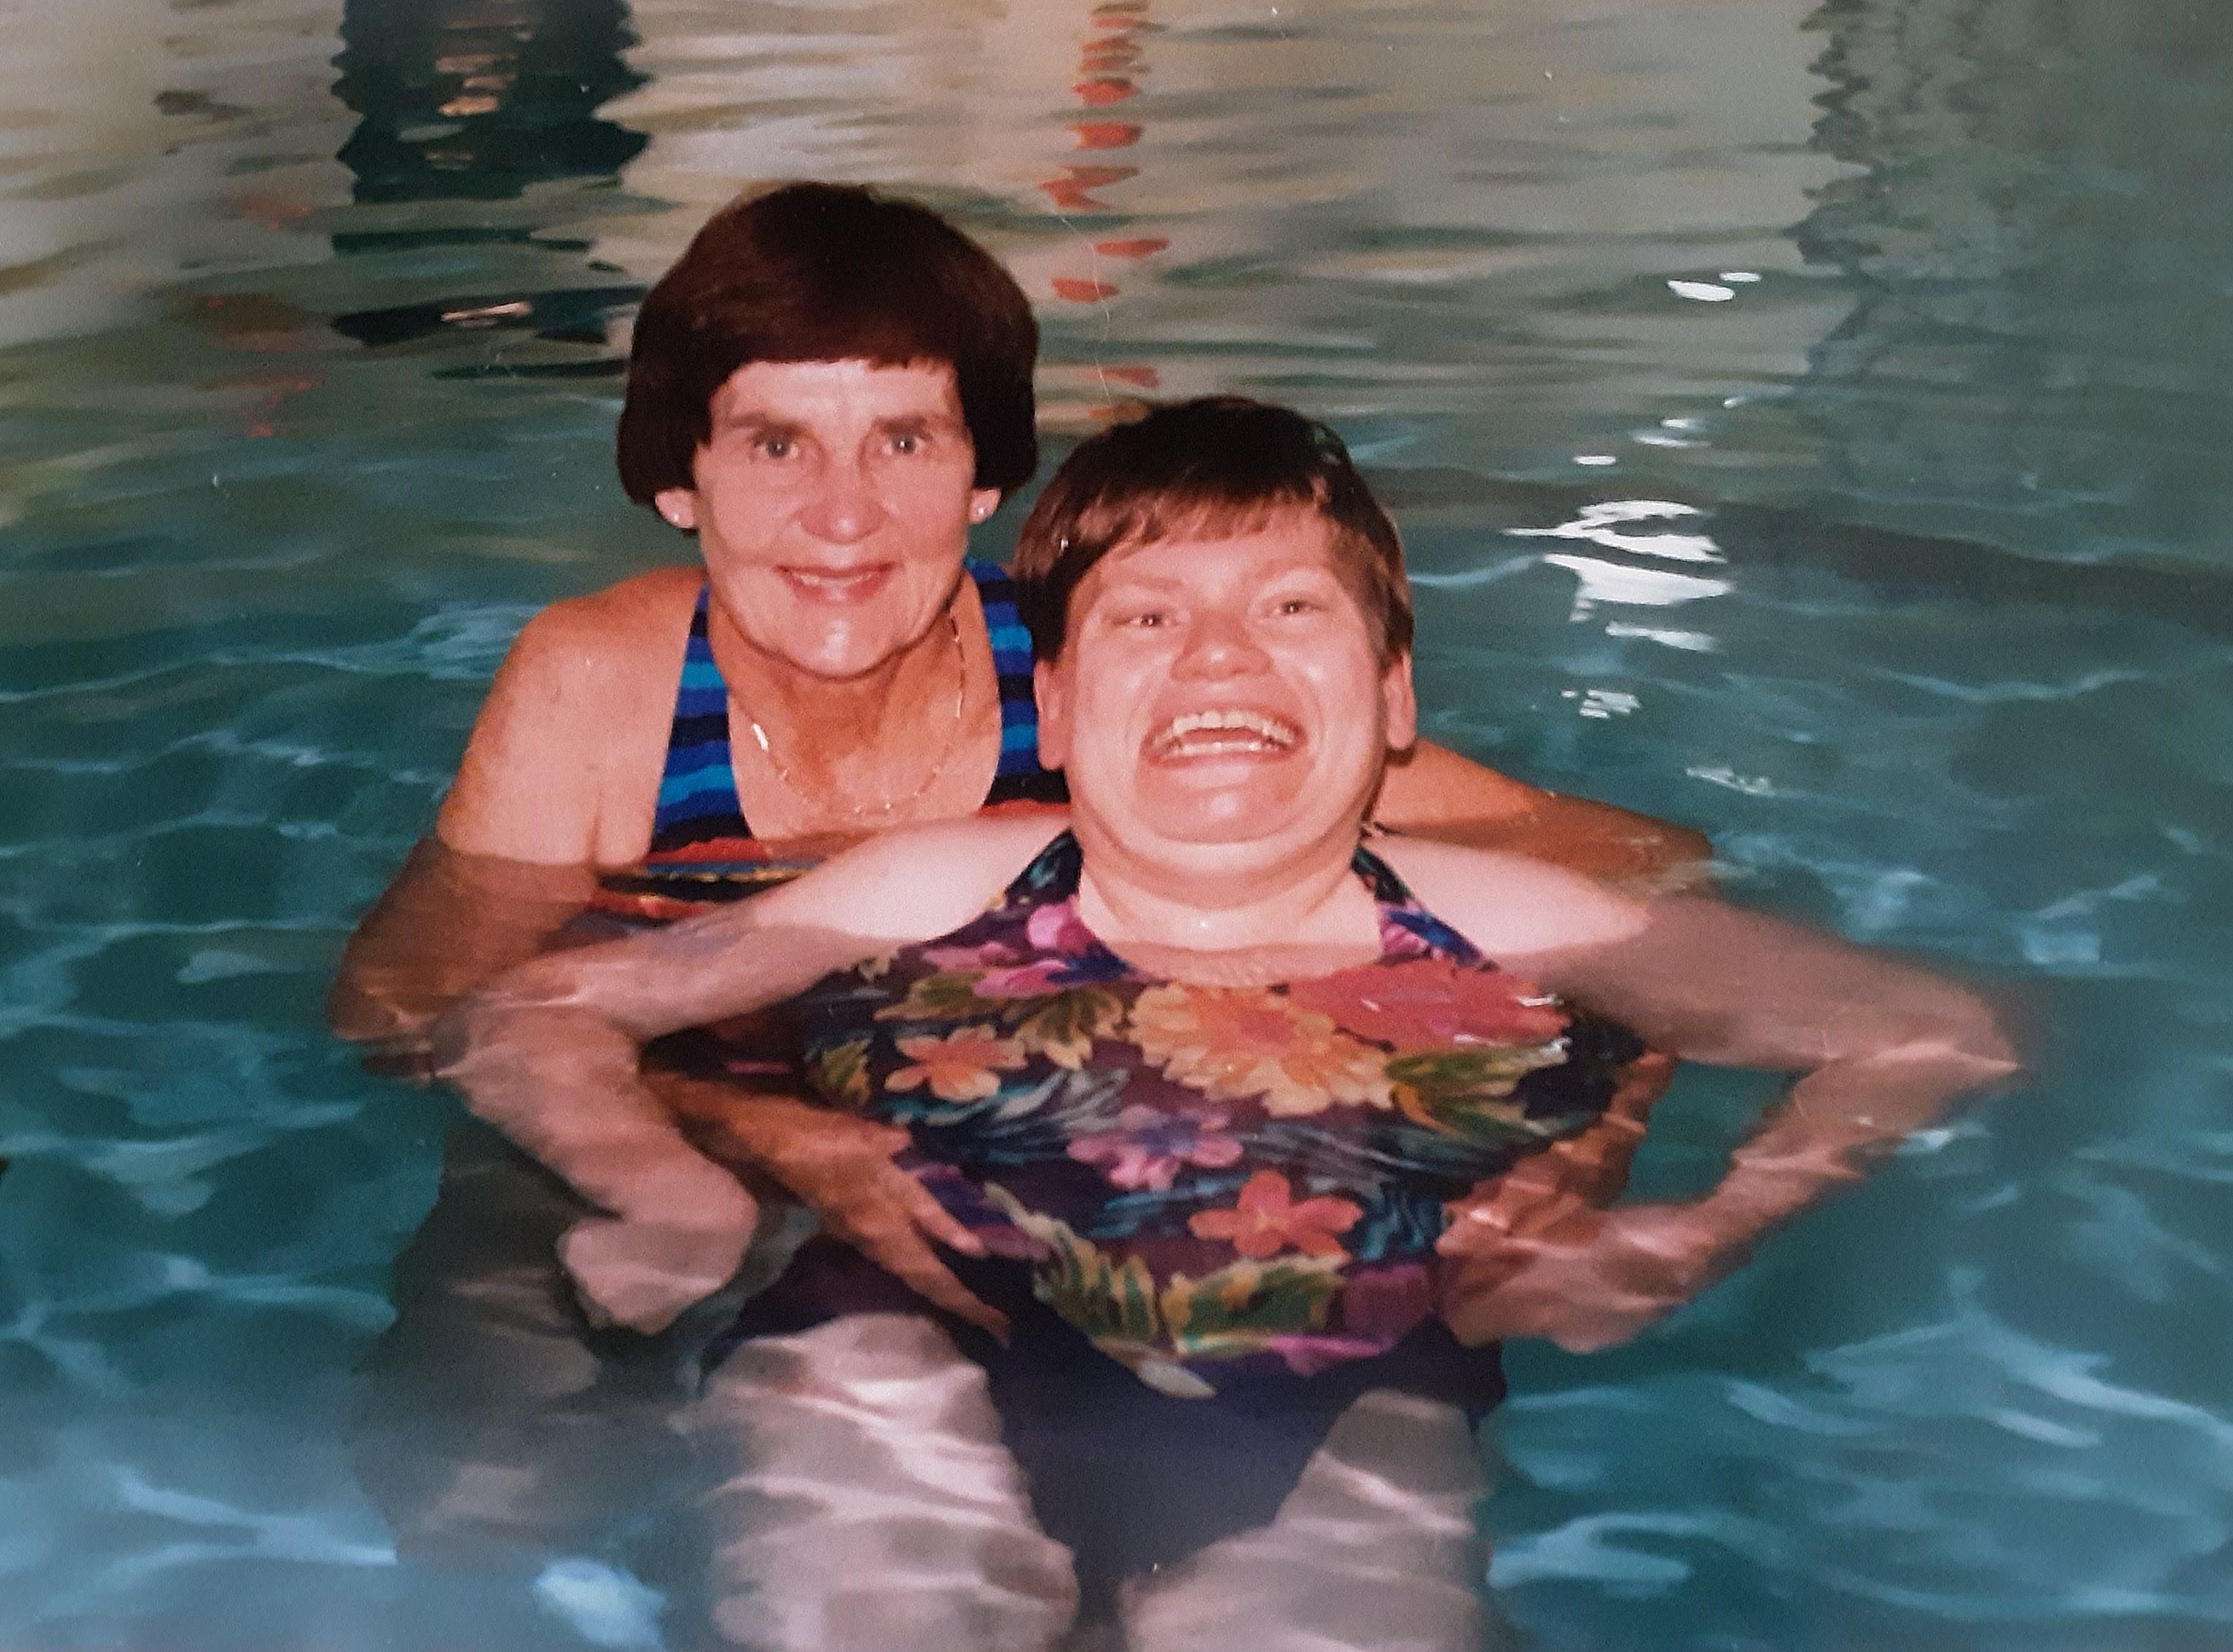 Photo is Bette in the pool in 1997 with Sharon, a person who is supported by Ongwanada.